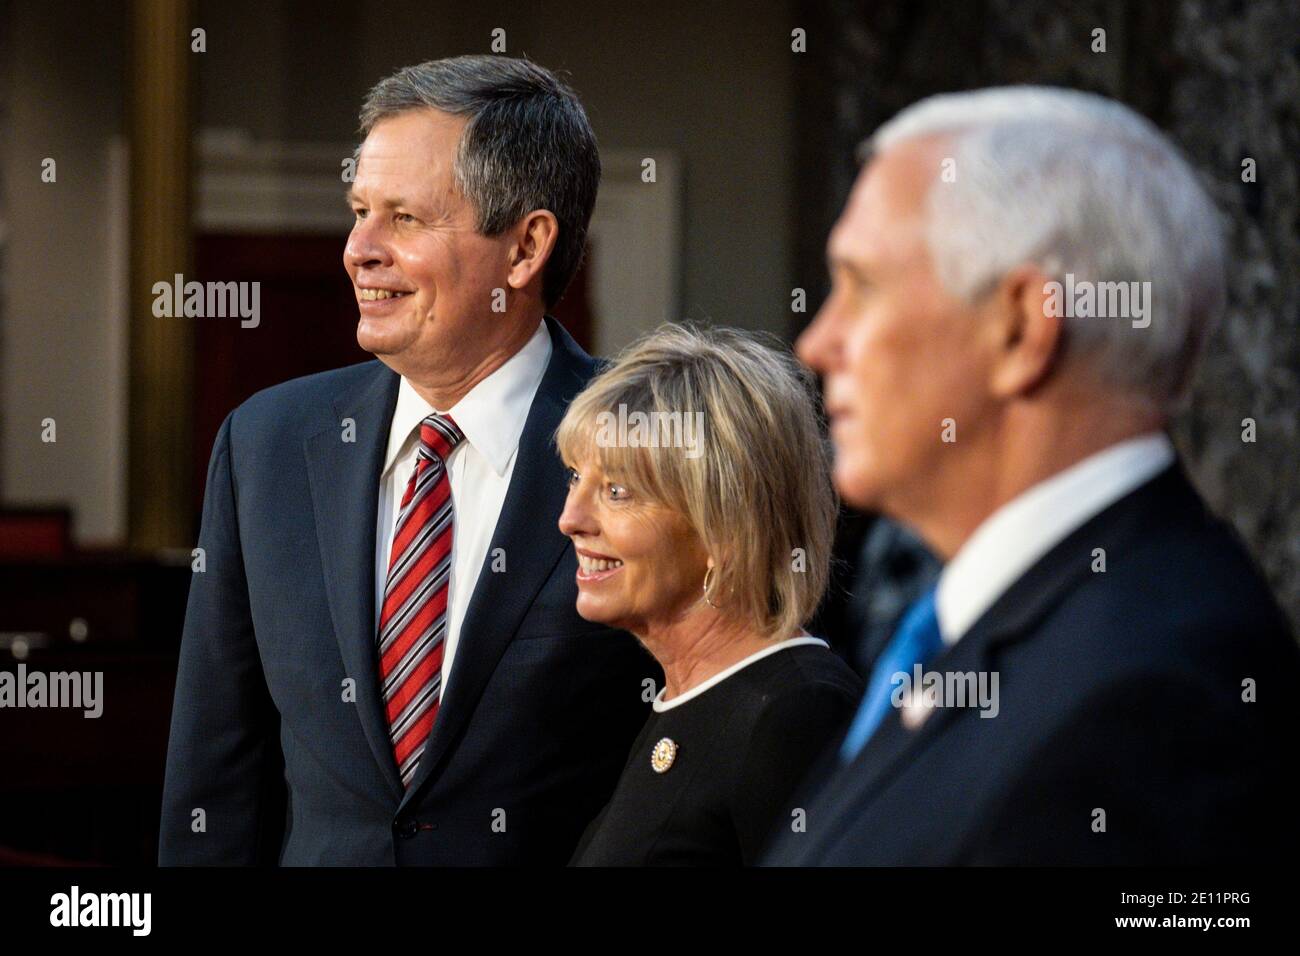 Washington, USA. 03rd Jan, 2021. Vice President Mike Pence poses for a photo with Senator Steve Daines (R-MT) and his wife, Cindy, during a mock swearing-in ceremony in the Old Senate Chamber on Capitol Hill on January 3, 2021 in Washington, DC. (Photo by Pete Marovich/Pool/Sipa USA) Credit: Sipa USA/Alamy Live News Stock Photo